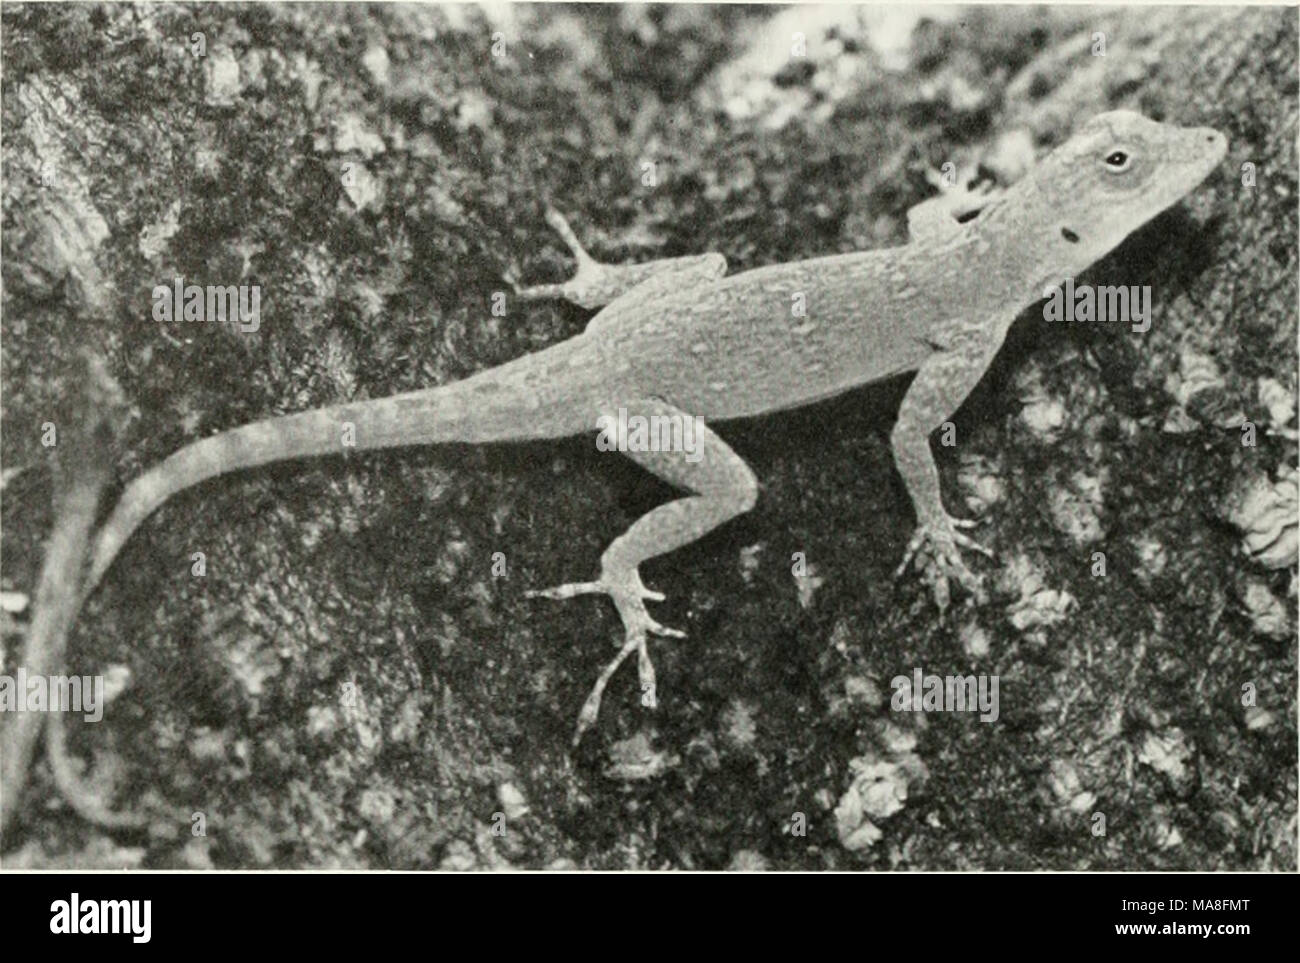 . The ecological impact of man on the south Florida herpetofauna . Figure 14. Green Bark Anole (Ano/is distichus doniinicensis). (LP) a relatively luxuriant growth of large trees, especially exotic fruit trees, and ornamental trees such as the black olive. Perhaps, one reason for this lizard's success in urban areas of Dade County is the large number of food items available to it. Colette (1961), Ruibal (1964). Brach (1976) and Dalrymple (1980) have reported A. eqiies- tris as feeding on the following: palm and Ficus fruits, leaves, spiders, leafhoppers, cicadas, cockroaches, beetles, treefrog Stock Photo